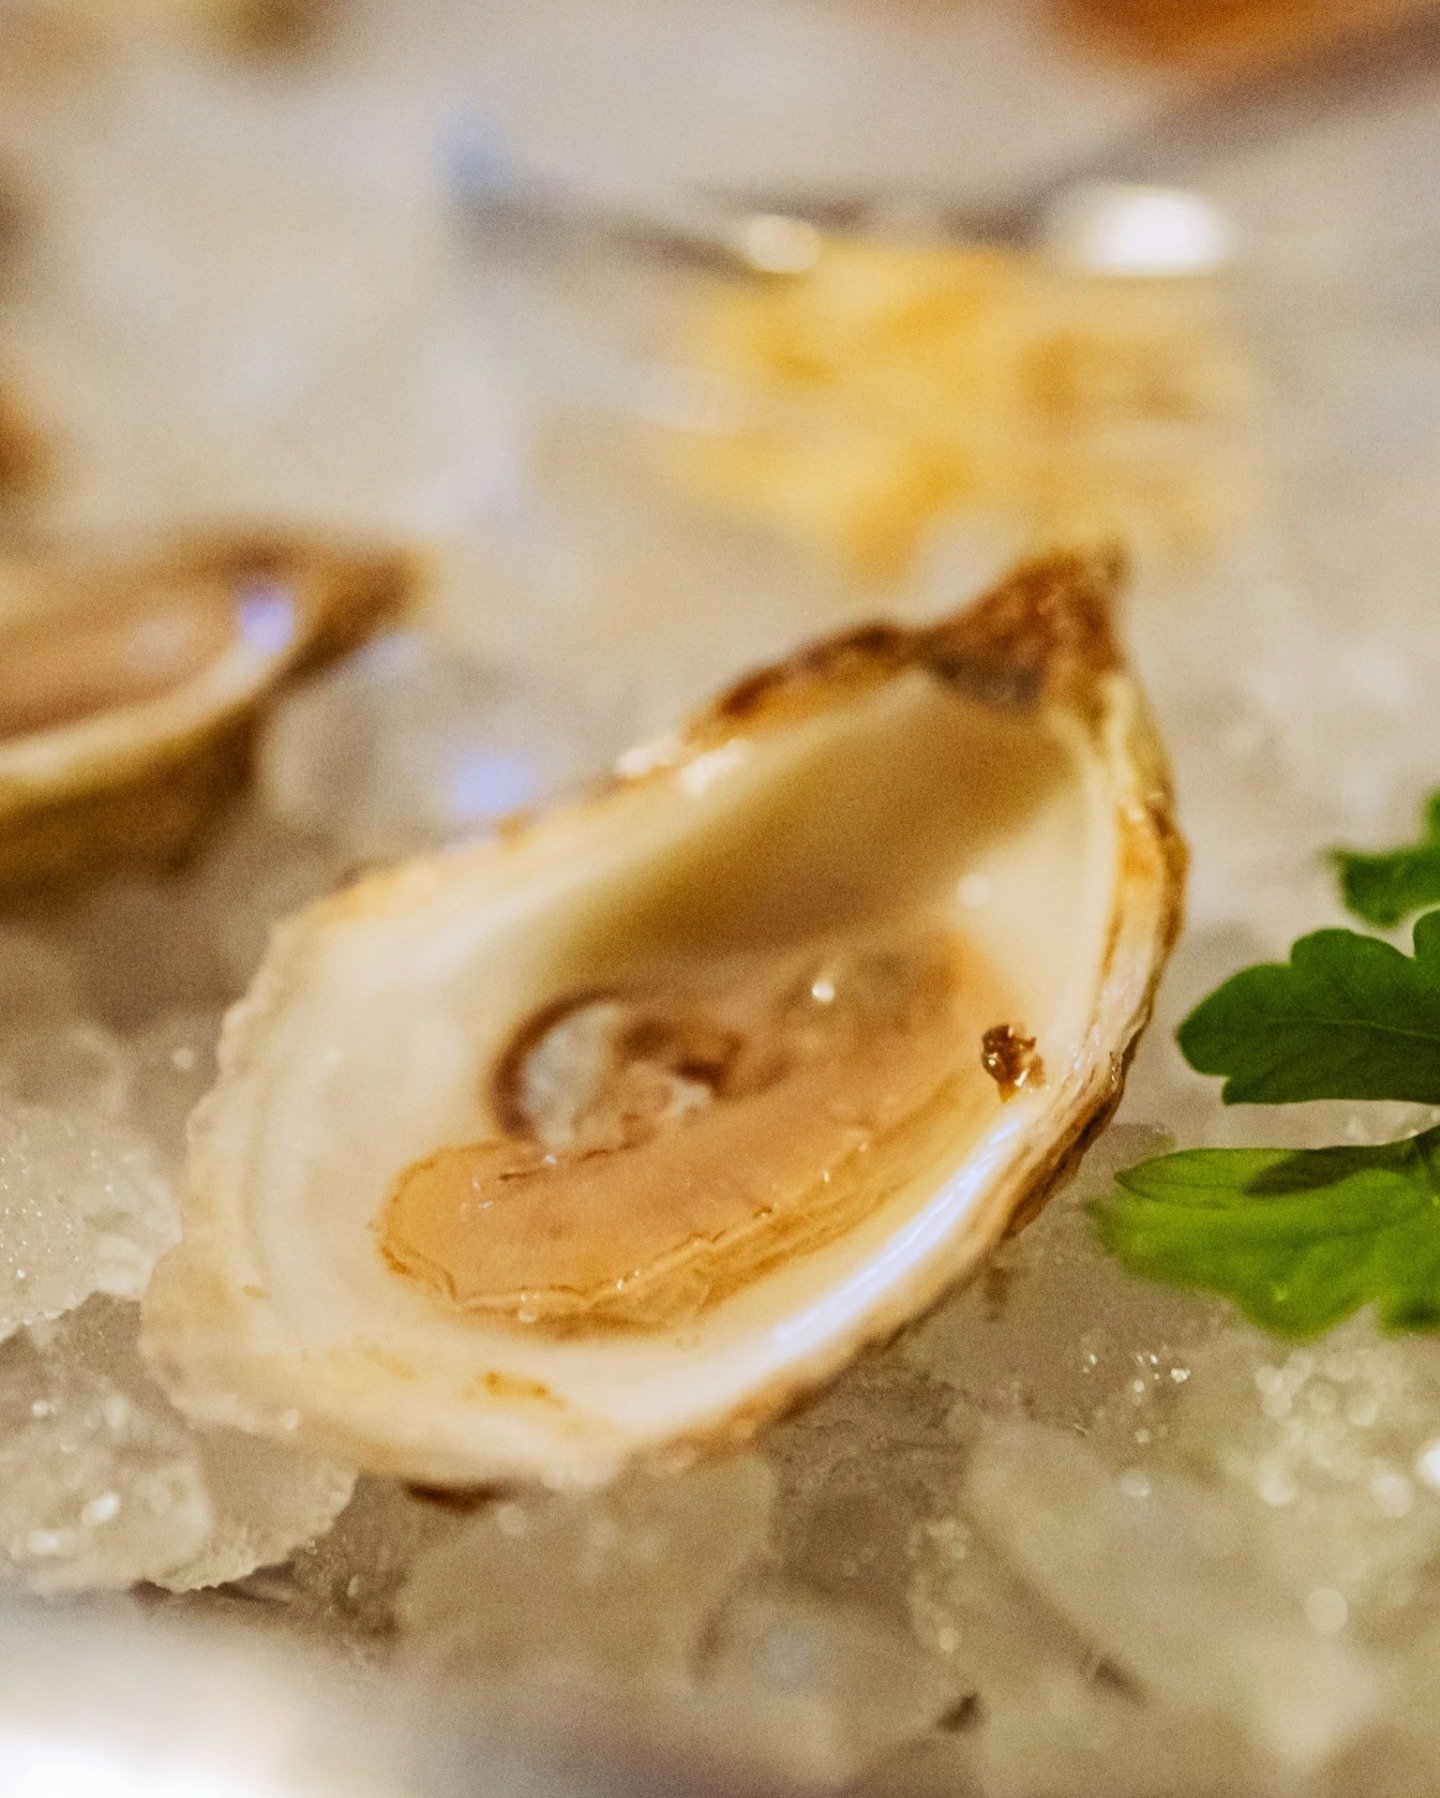 Behold, the beauty of a single oyster&mdash;a natural masterpiece. With its gleaming shell and briny essence, it's a true marvel of the sea. Dive in and savor its simple elegance. 🌊🍽️🦪 #OysterBeauty